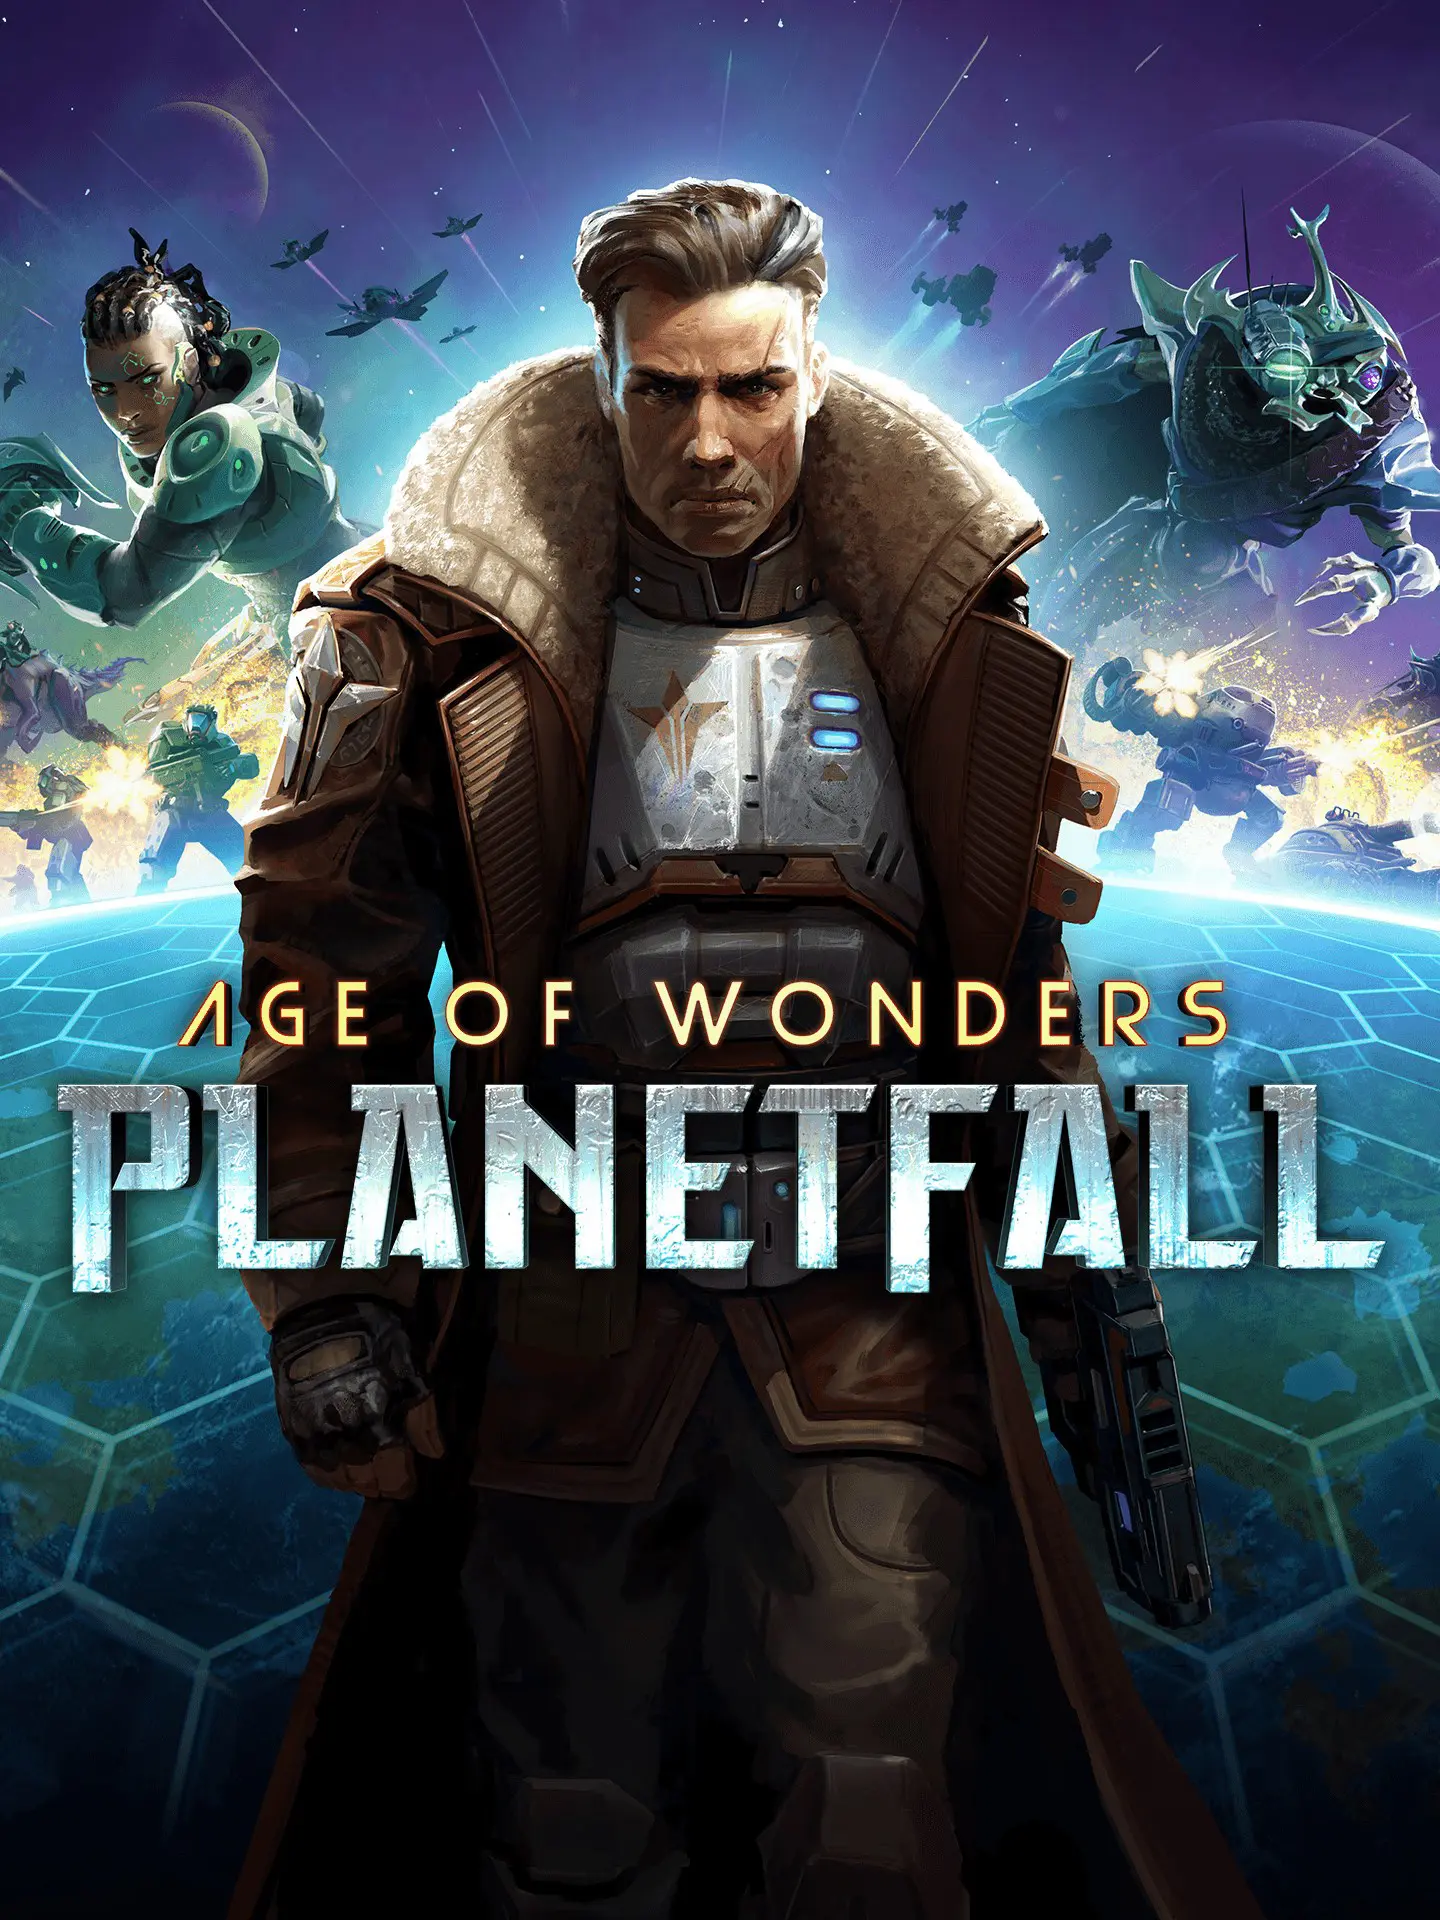 Age of Wonders Planetfall - Paragon Noble Cosmetic Pack DLC (PC / Mac) - Steam - Digital Code